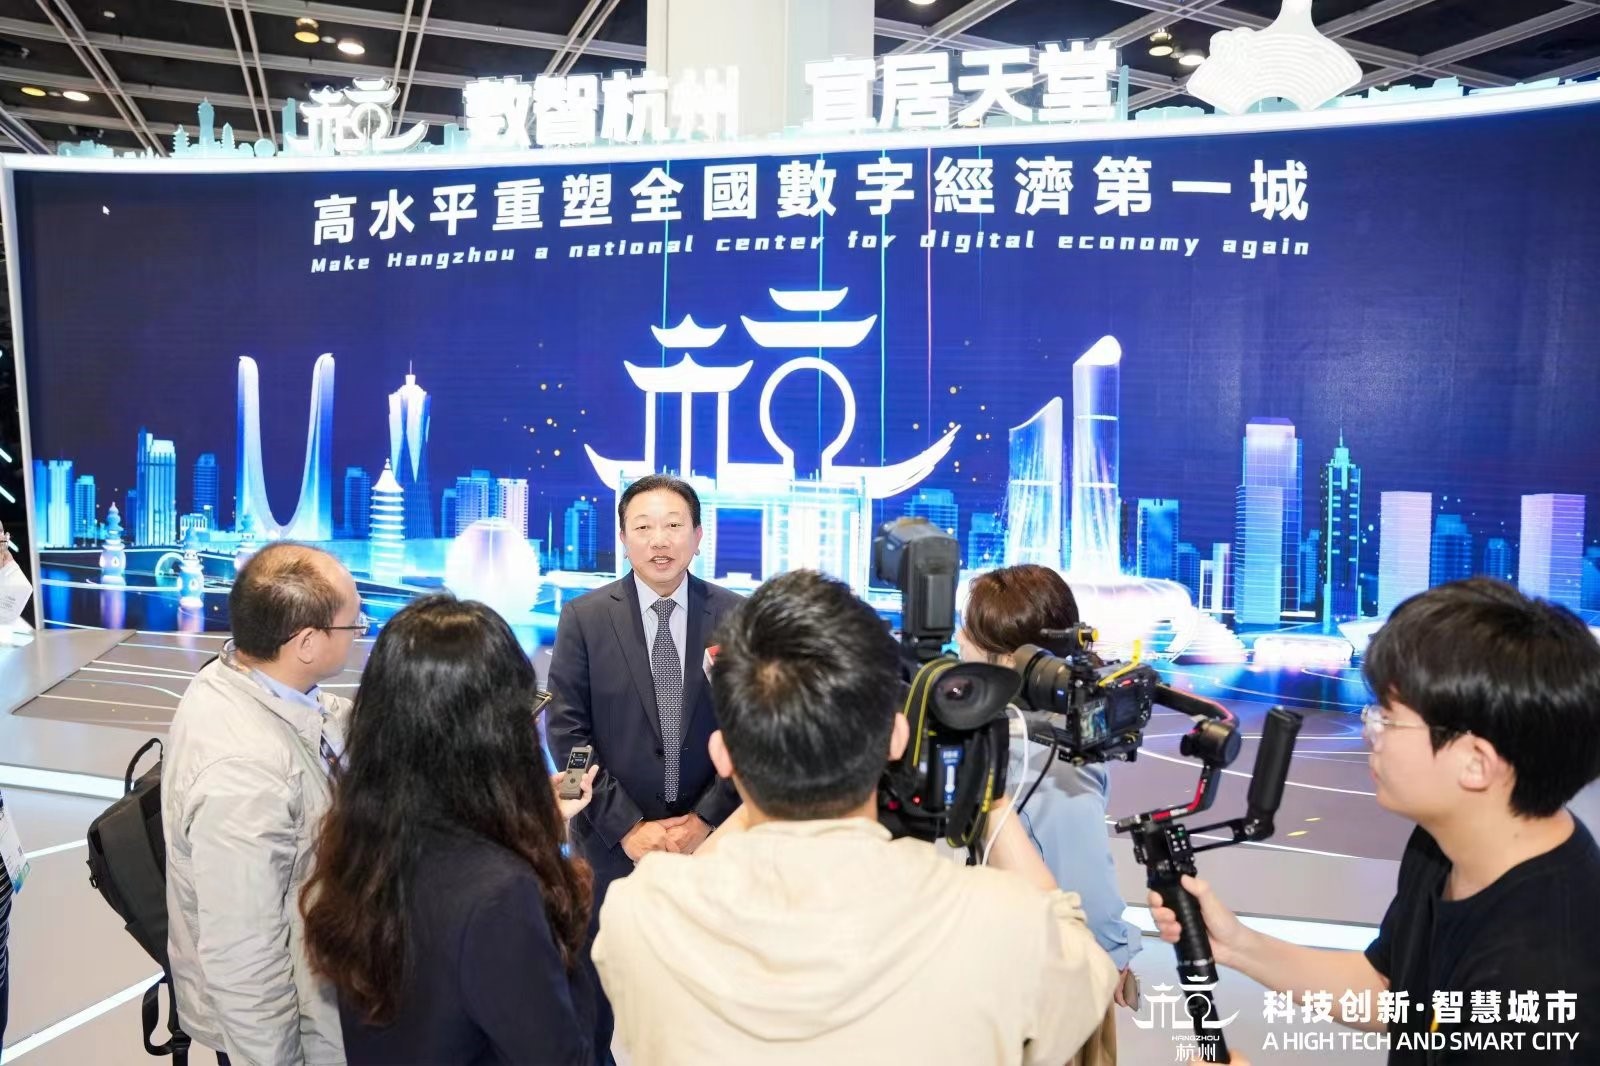 Pico and Hangzhou Expo Group form strategic alliance